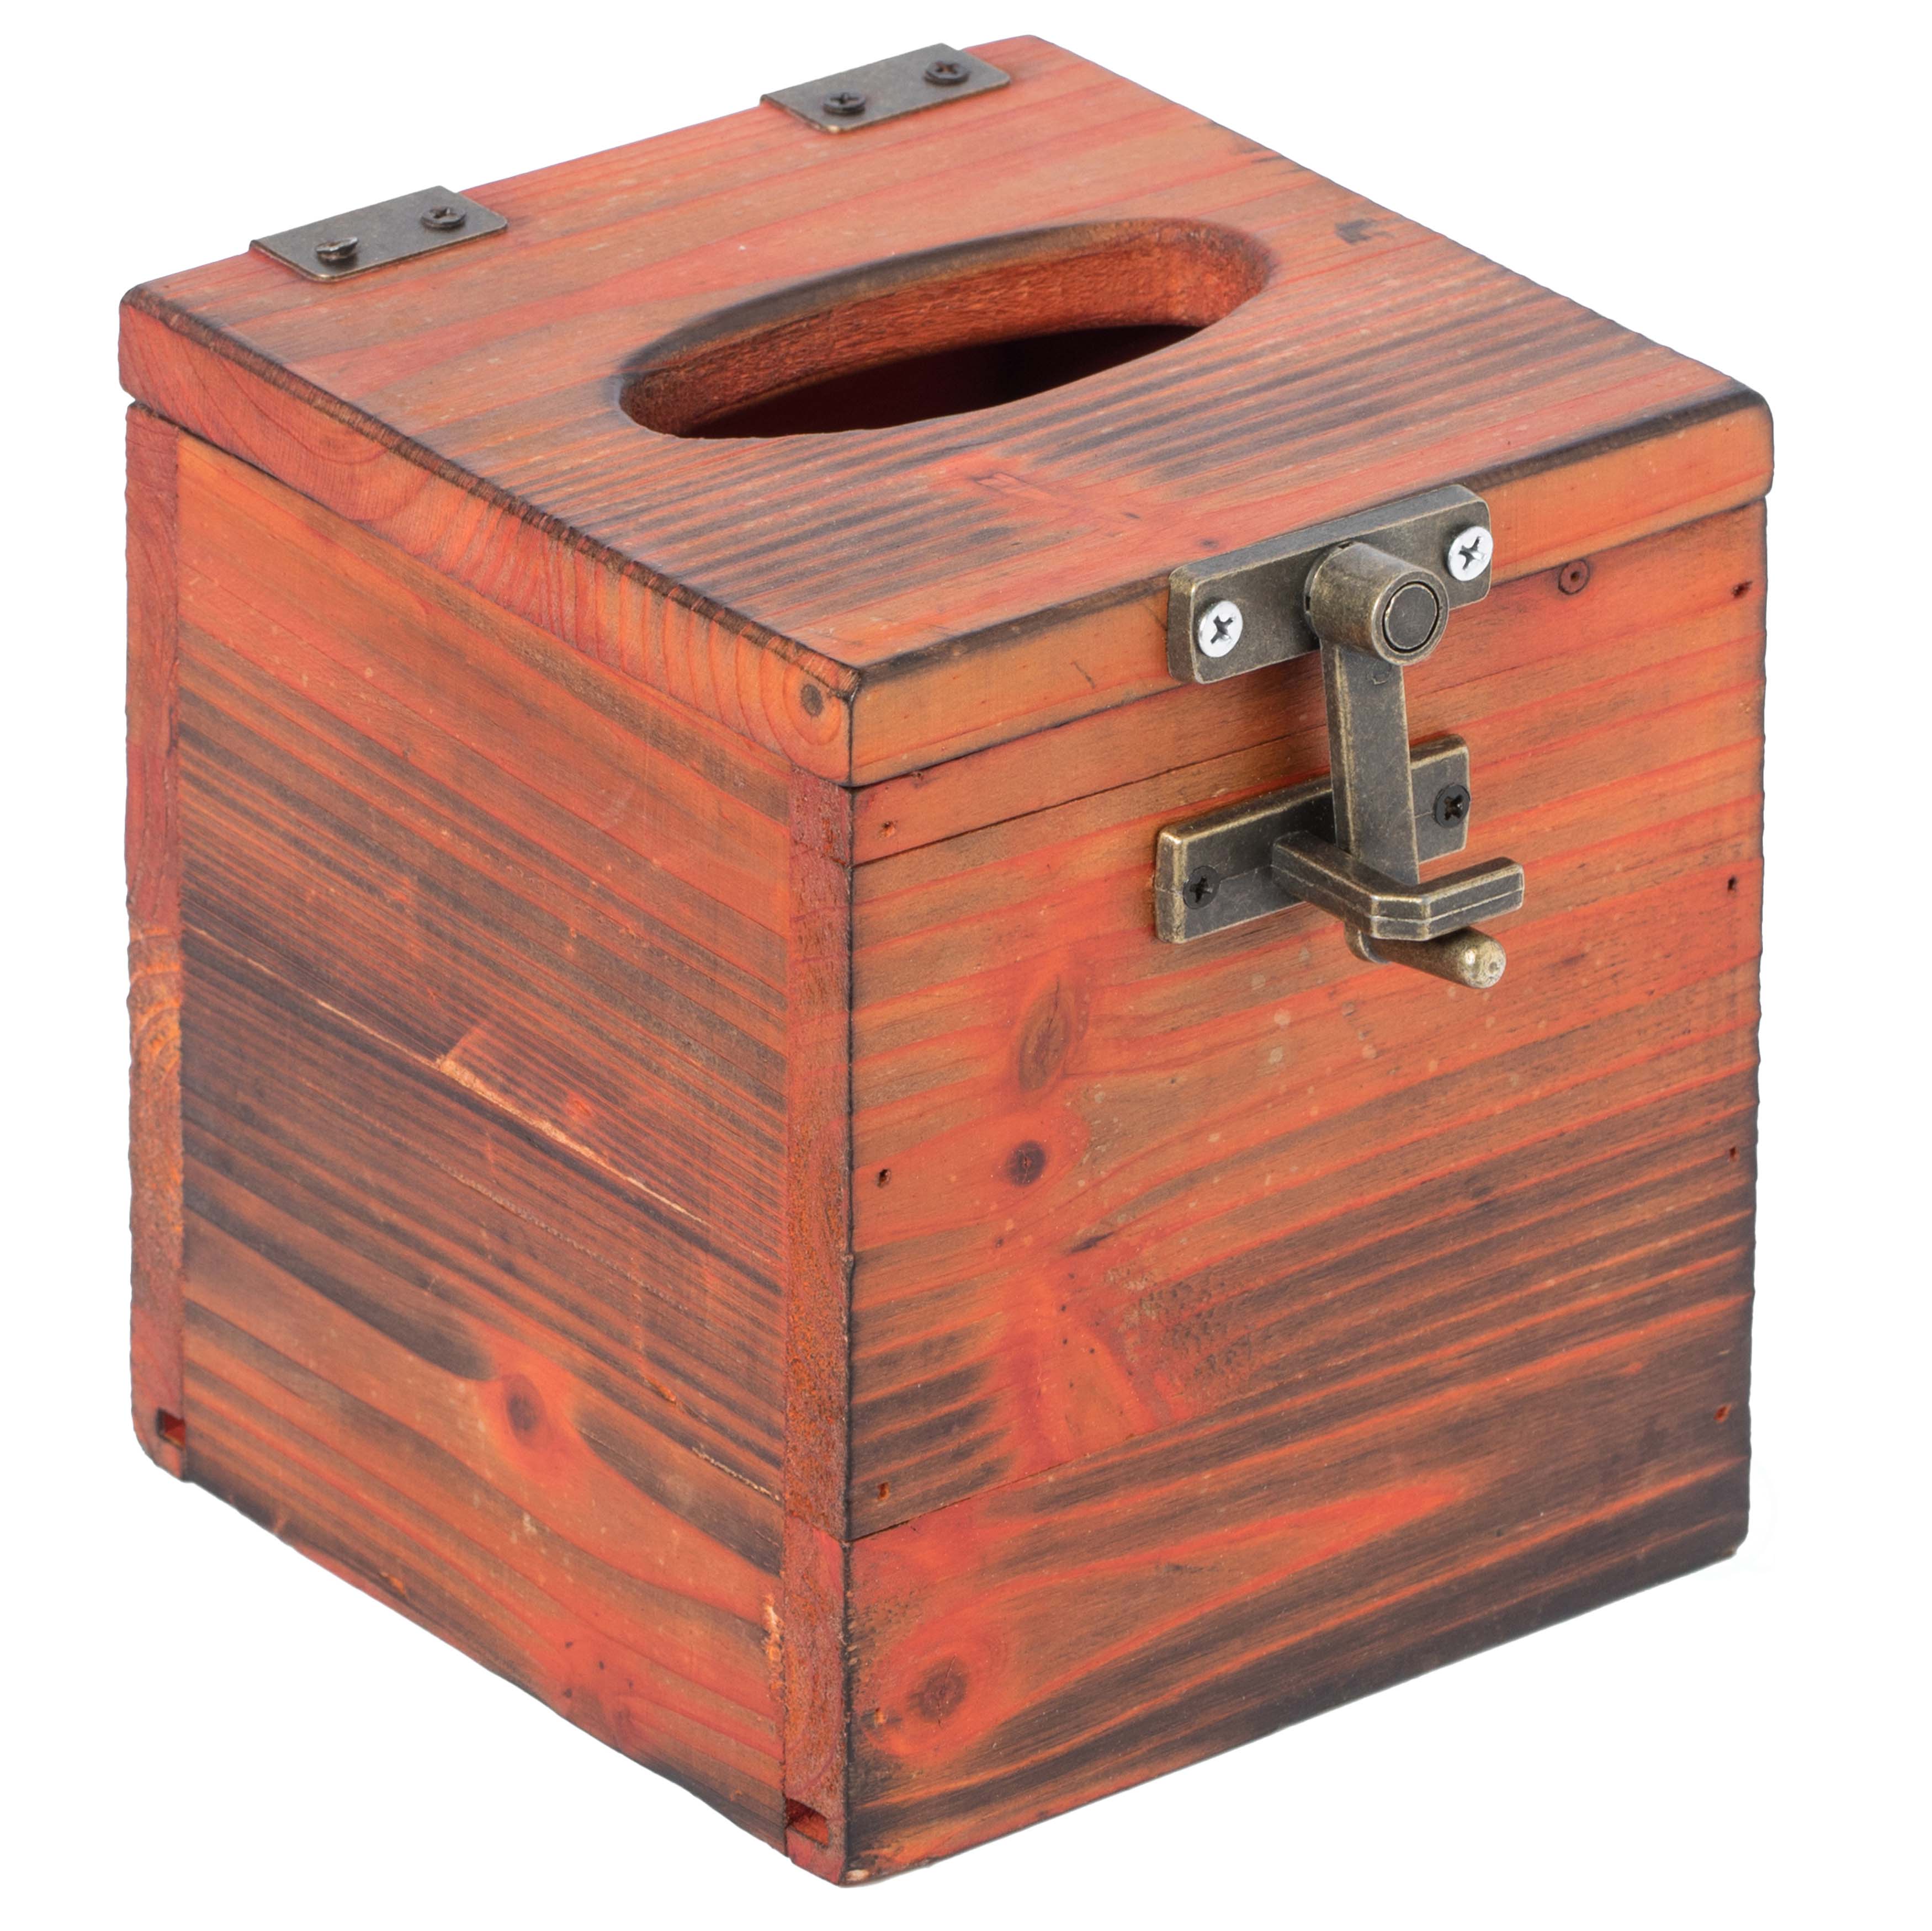 New Vintiquewise Square Wooden Rustic Lockable Tissue Box 